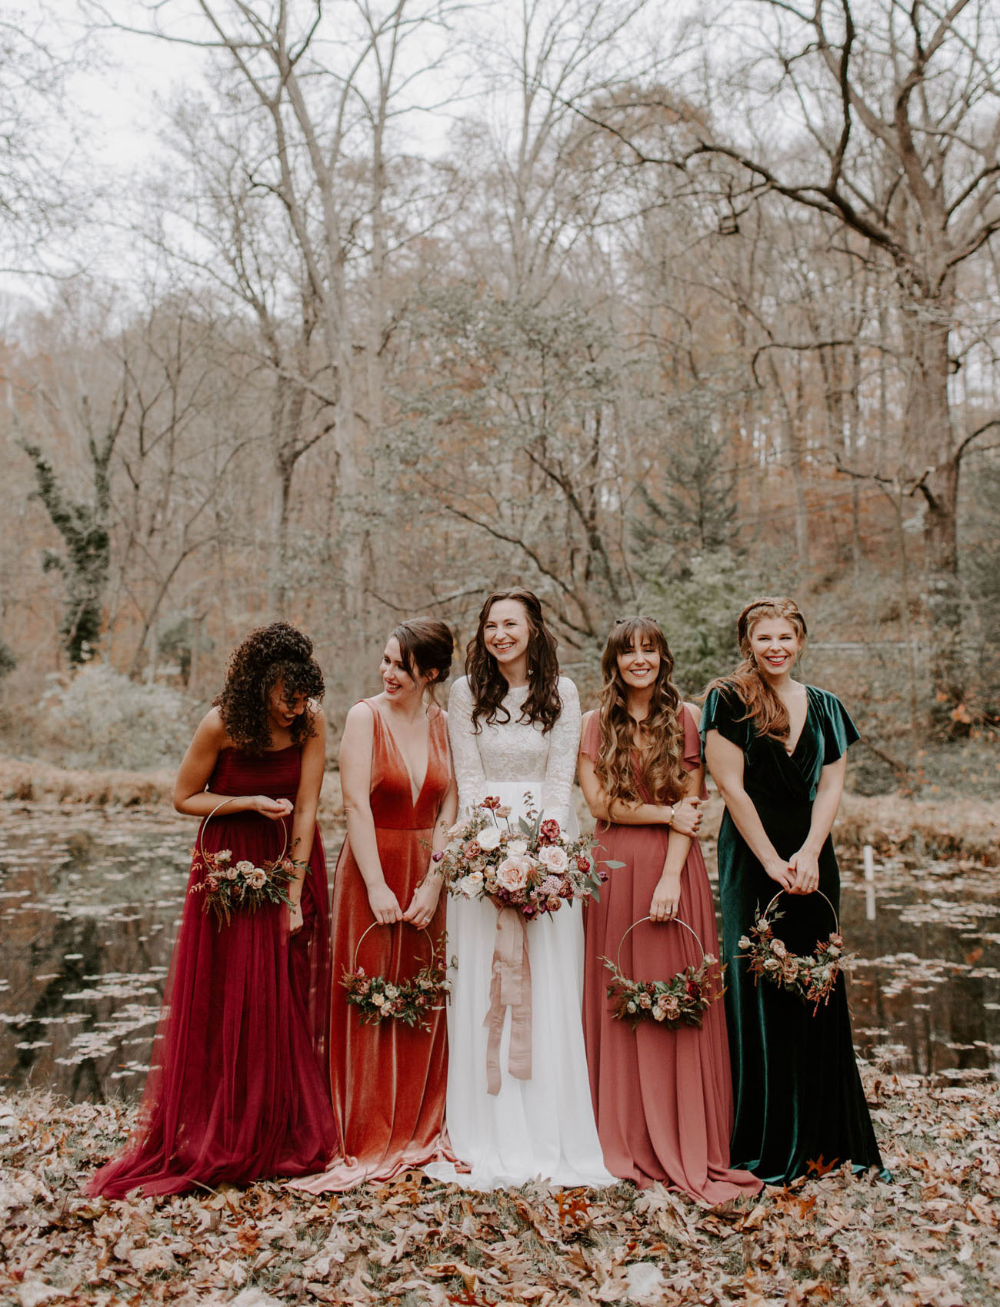 How to Nail the Mismatched Bridesmaids Look - Green Wedding Shoes -   17 dress Green wedding ideas